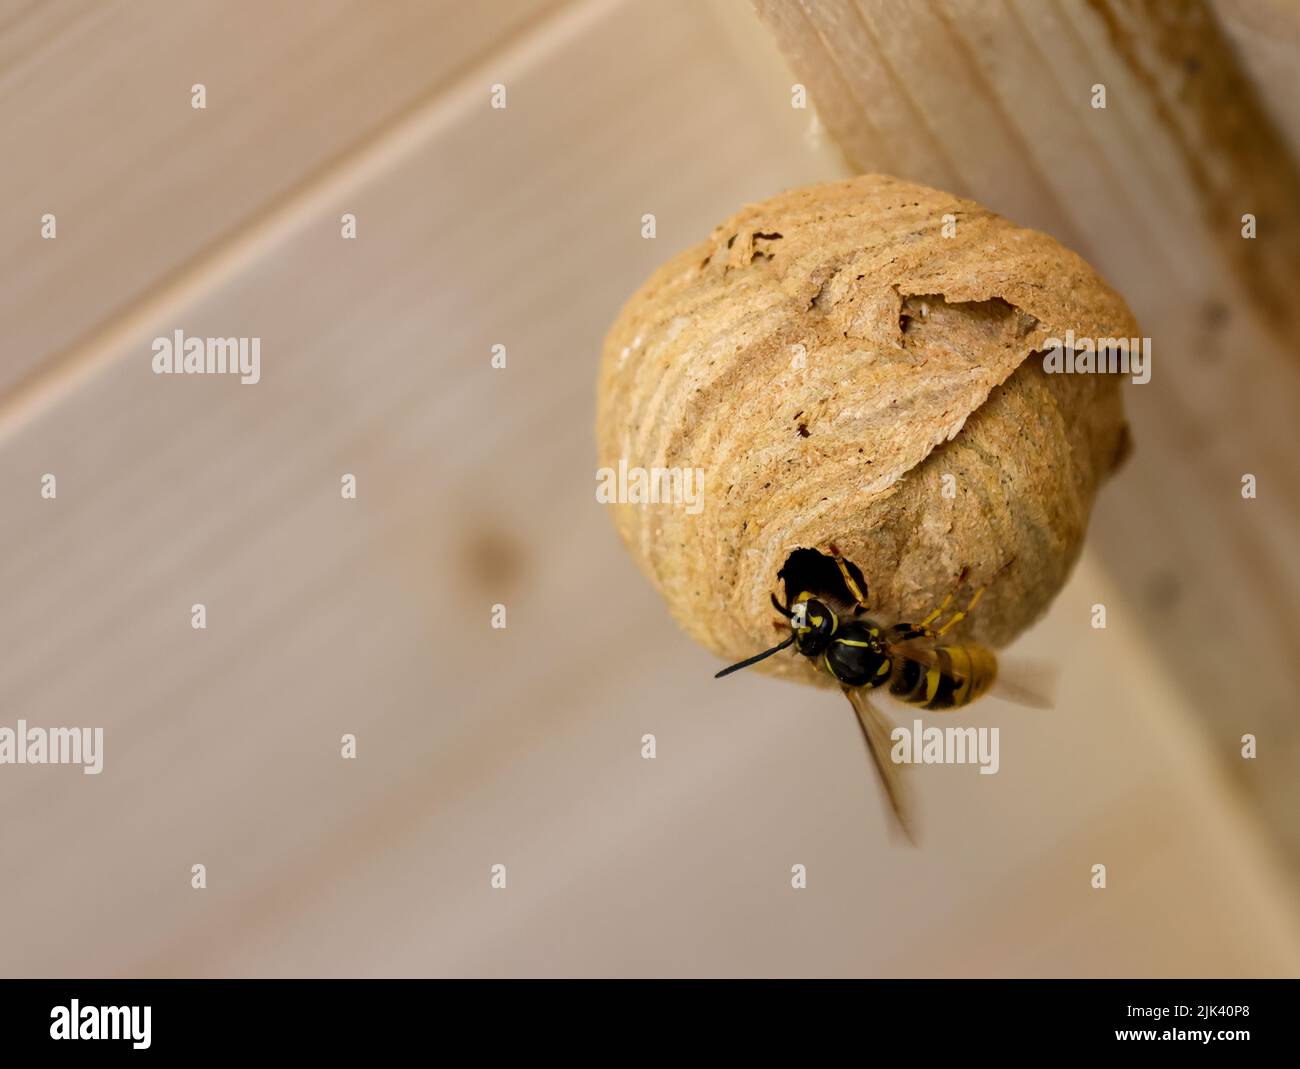 Queen wasp building nest, round structure suspended from wooden beams. Selective focus on insect with motion blur from wing movement. Dublin, Ireland Stock Photo